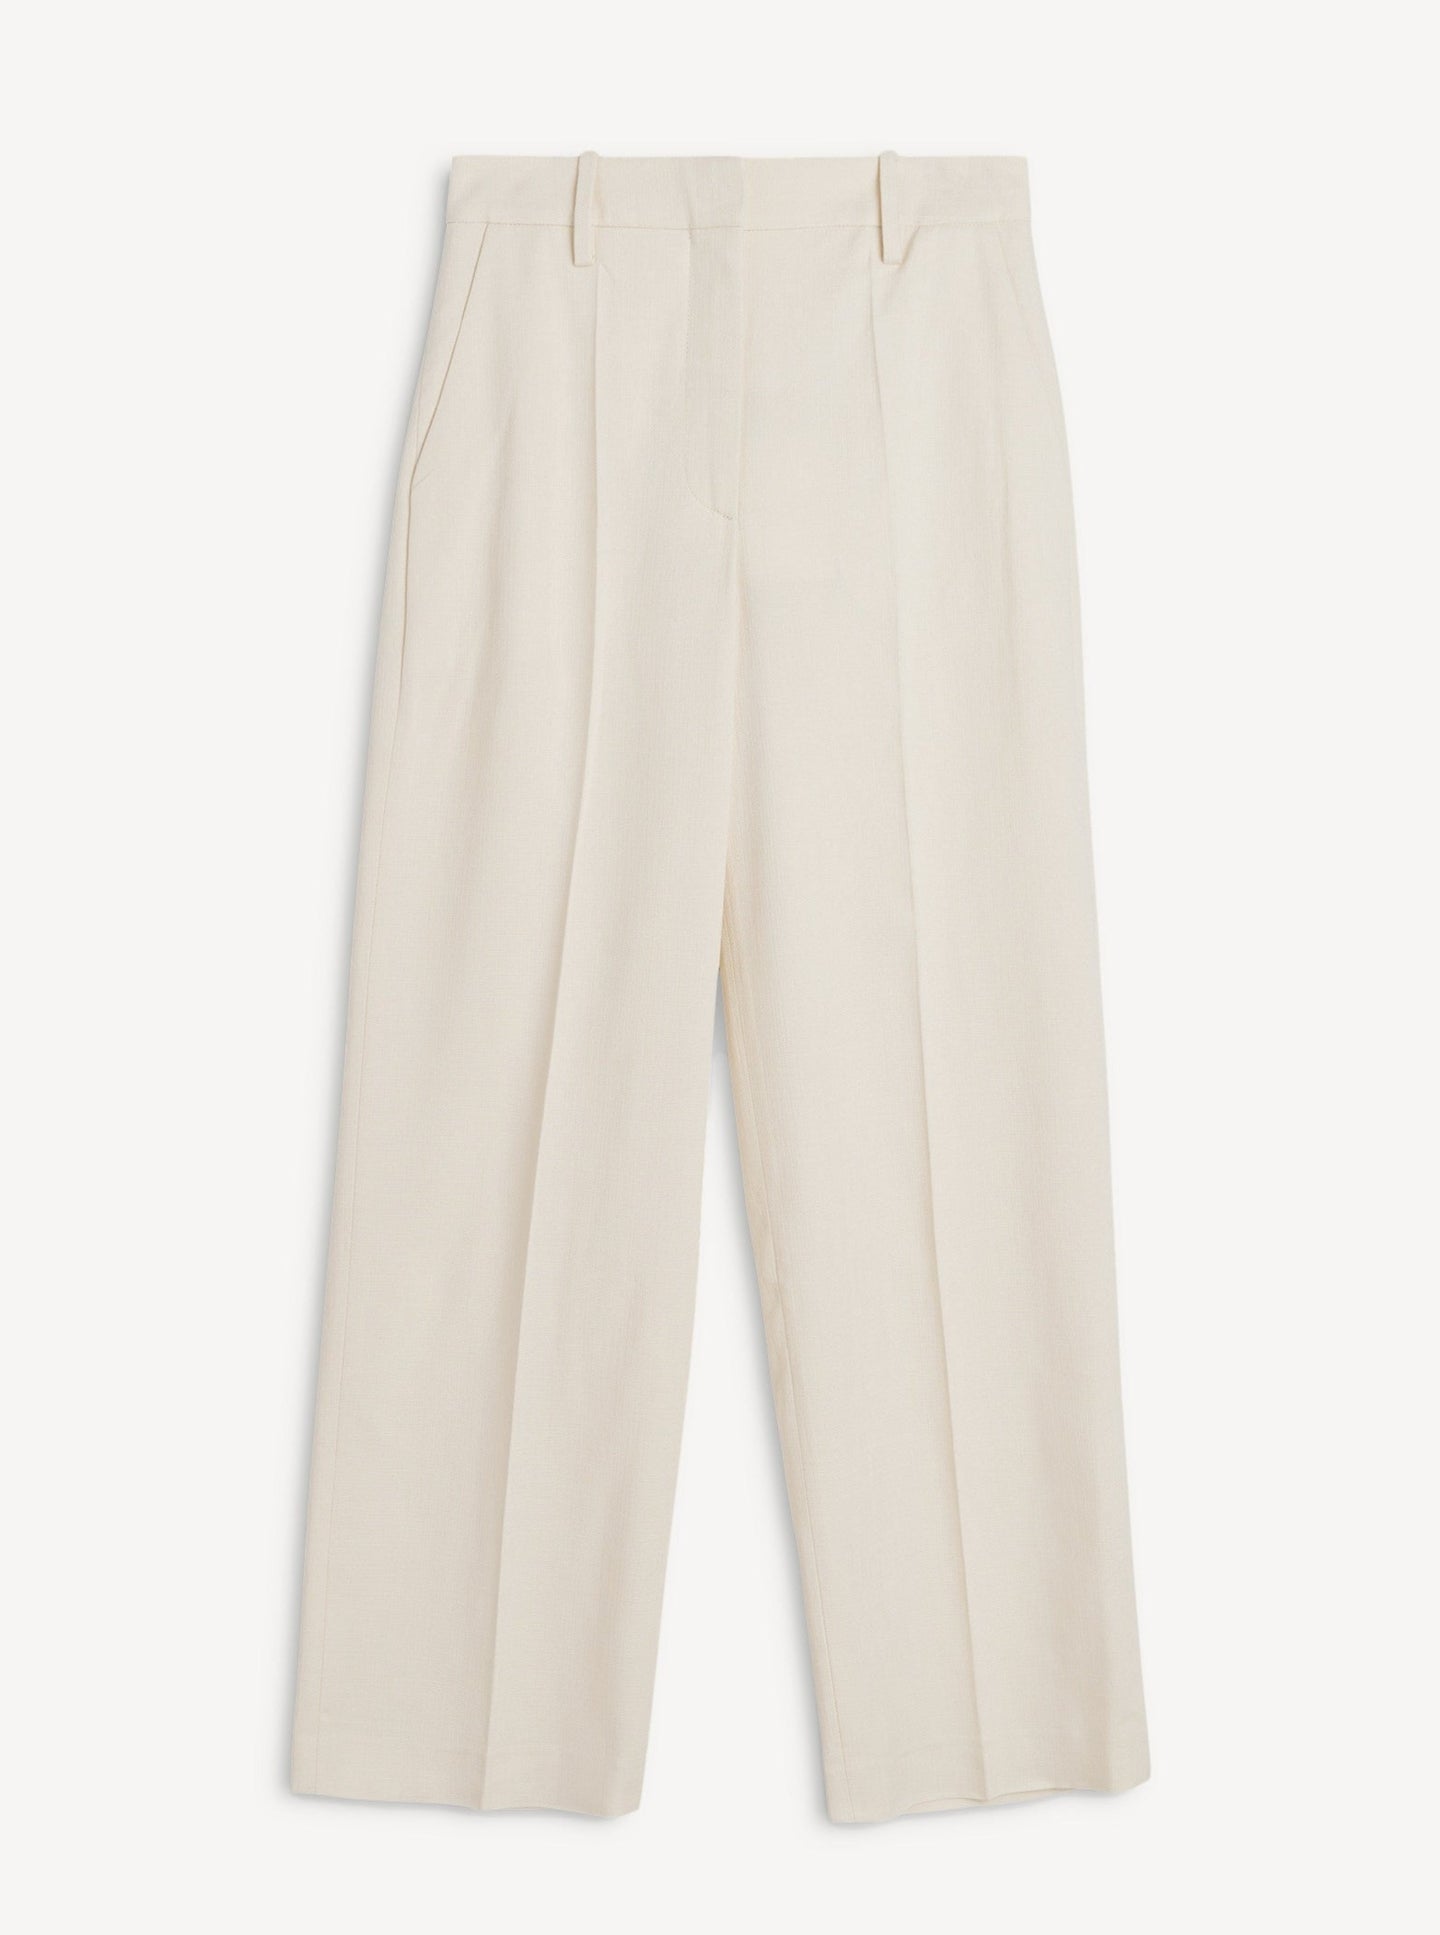 White High Waisted Wide Leg Trousers . Trousers | High waisted wide leg  pants, High waisted pants outfit, Wide leg trousers